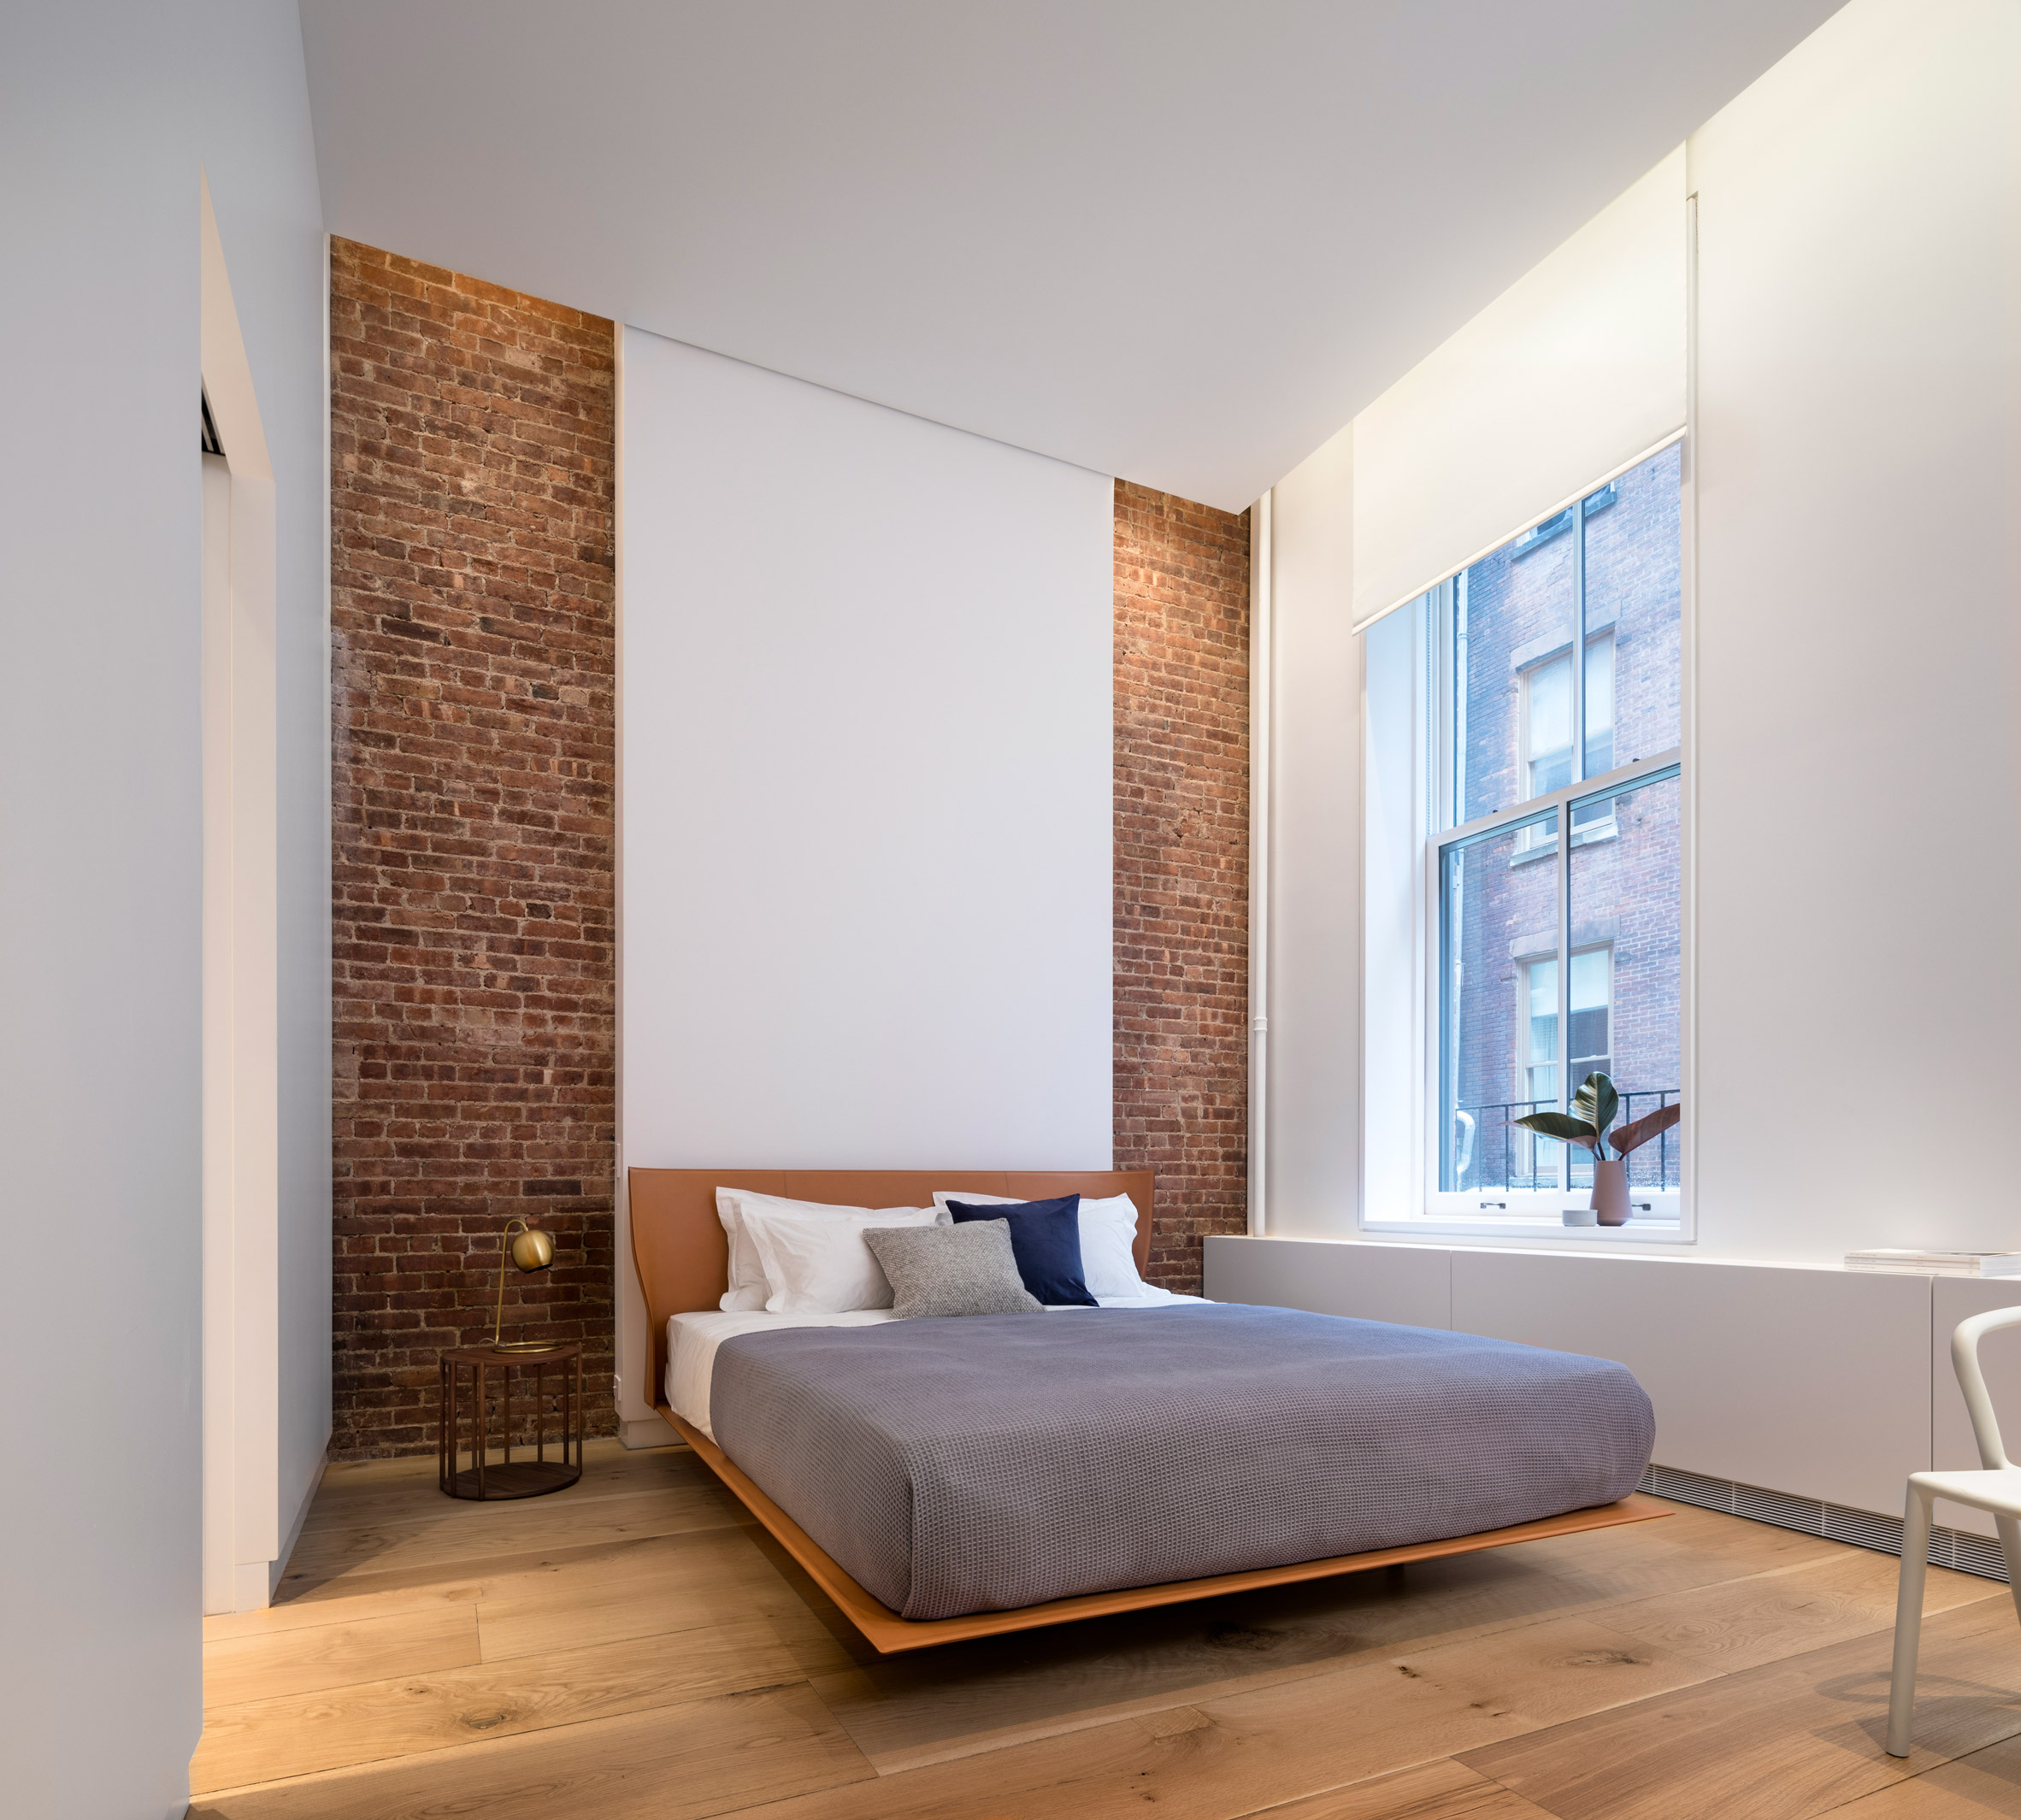 BC—OA incorporated brick party walls into the space